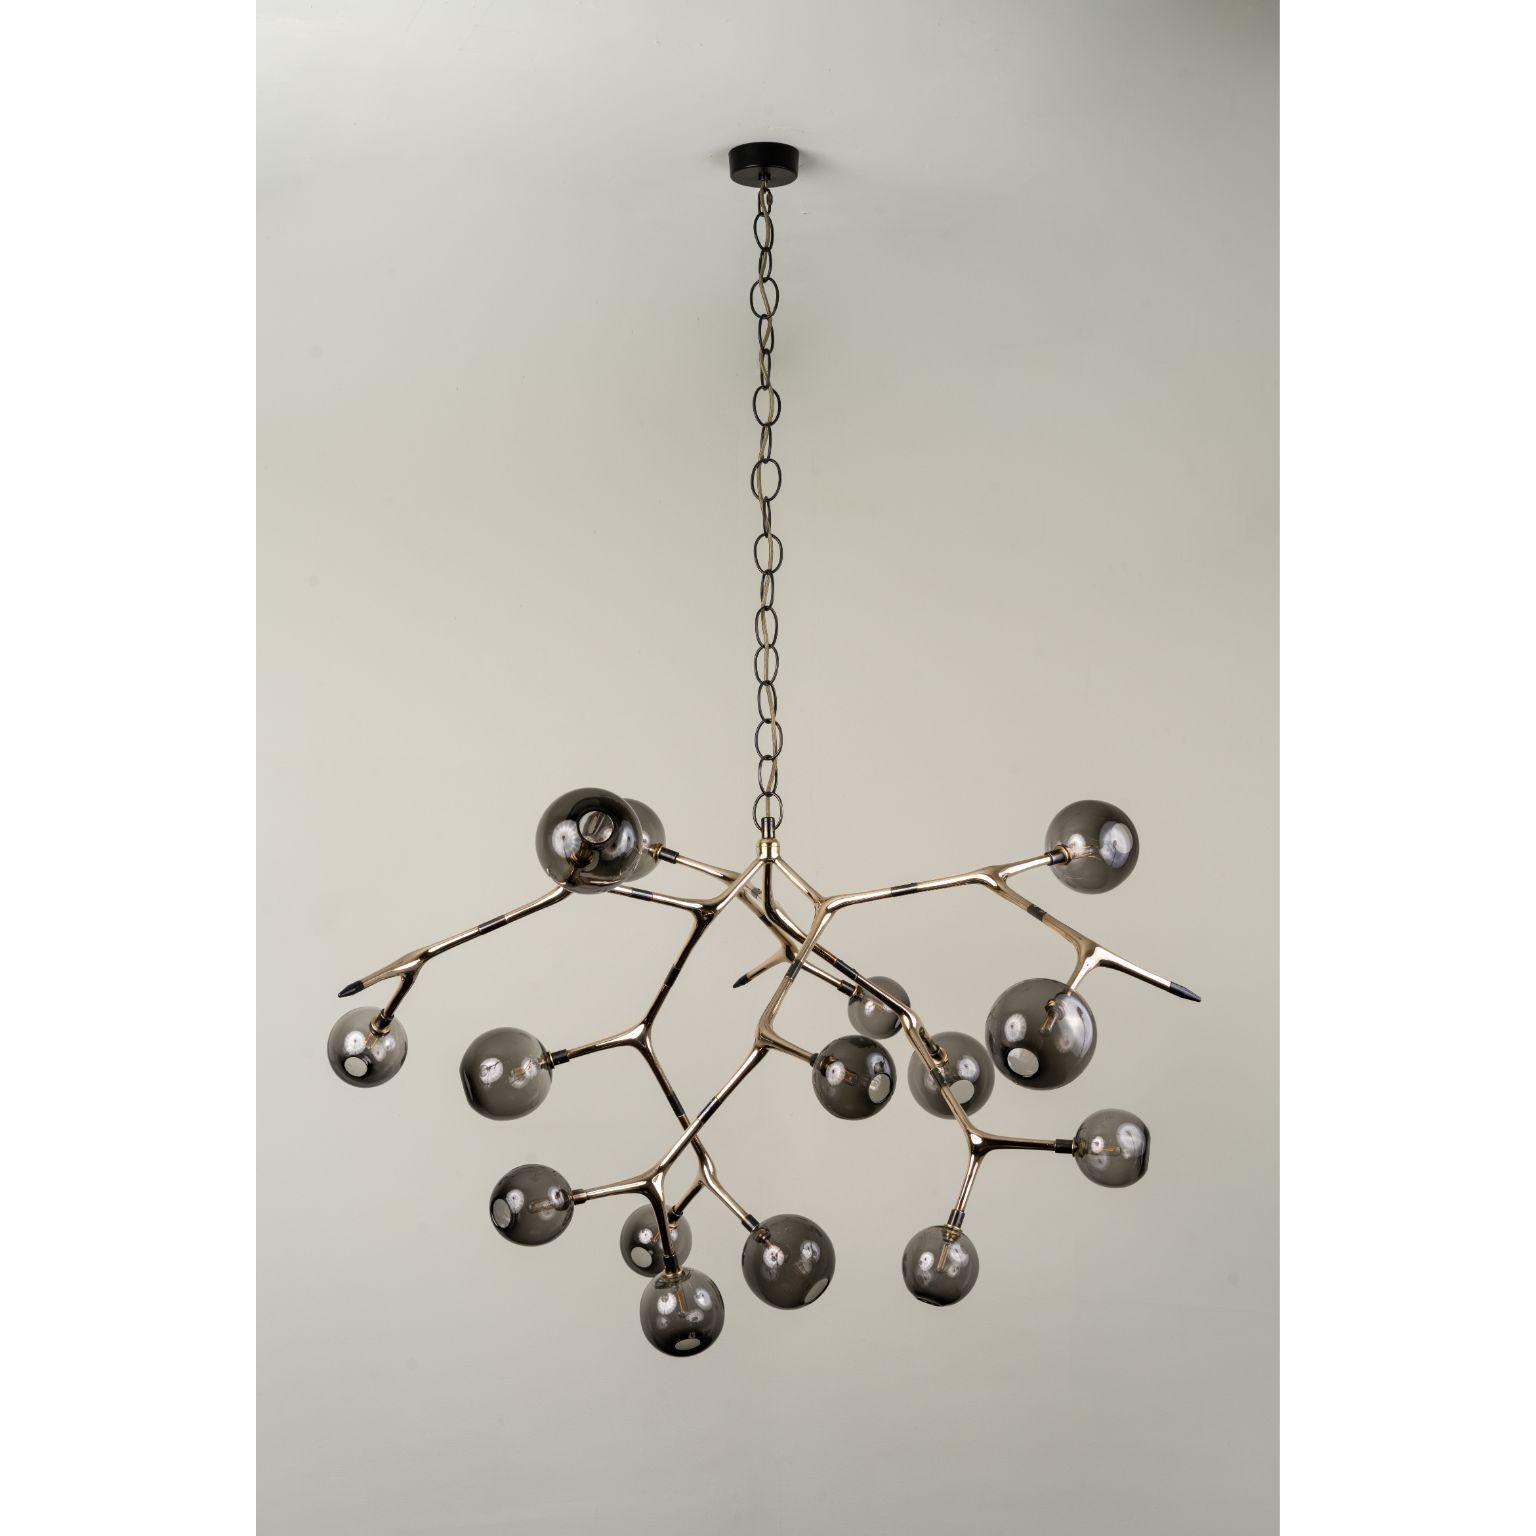 Smoke and Polished Bronze Maratus 15 Pendant Lamp by Isabel Moncada
Dimensions: Ø 135 x H 160 cm.
Materials: Cast bronze, blown glass and turned brass.
Weight: 20 kg.

The image of a swarm of small lights at night is mesmerizing. Maratus 15 is a